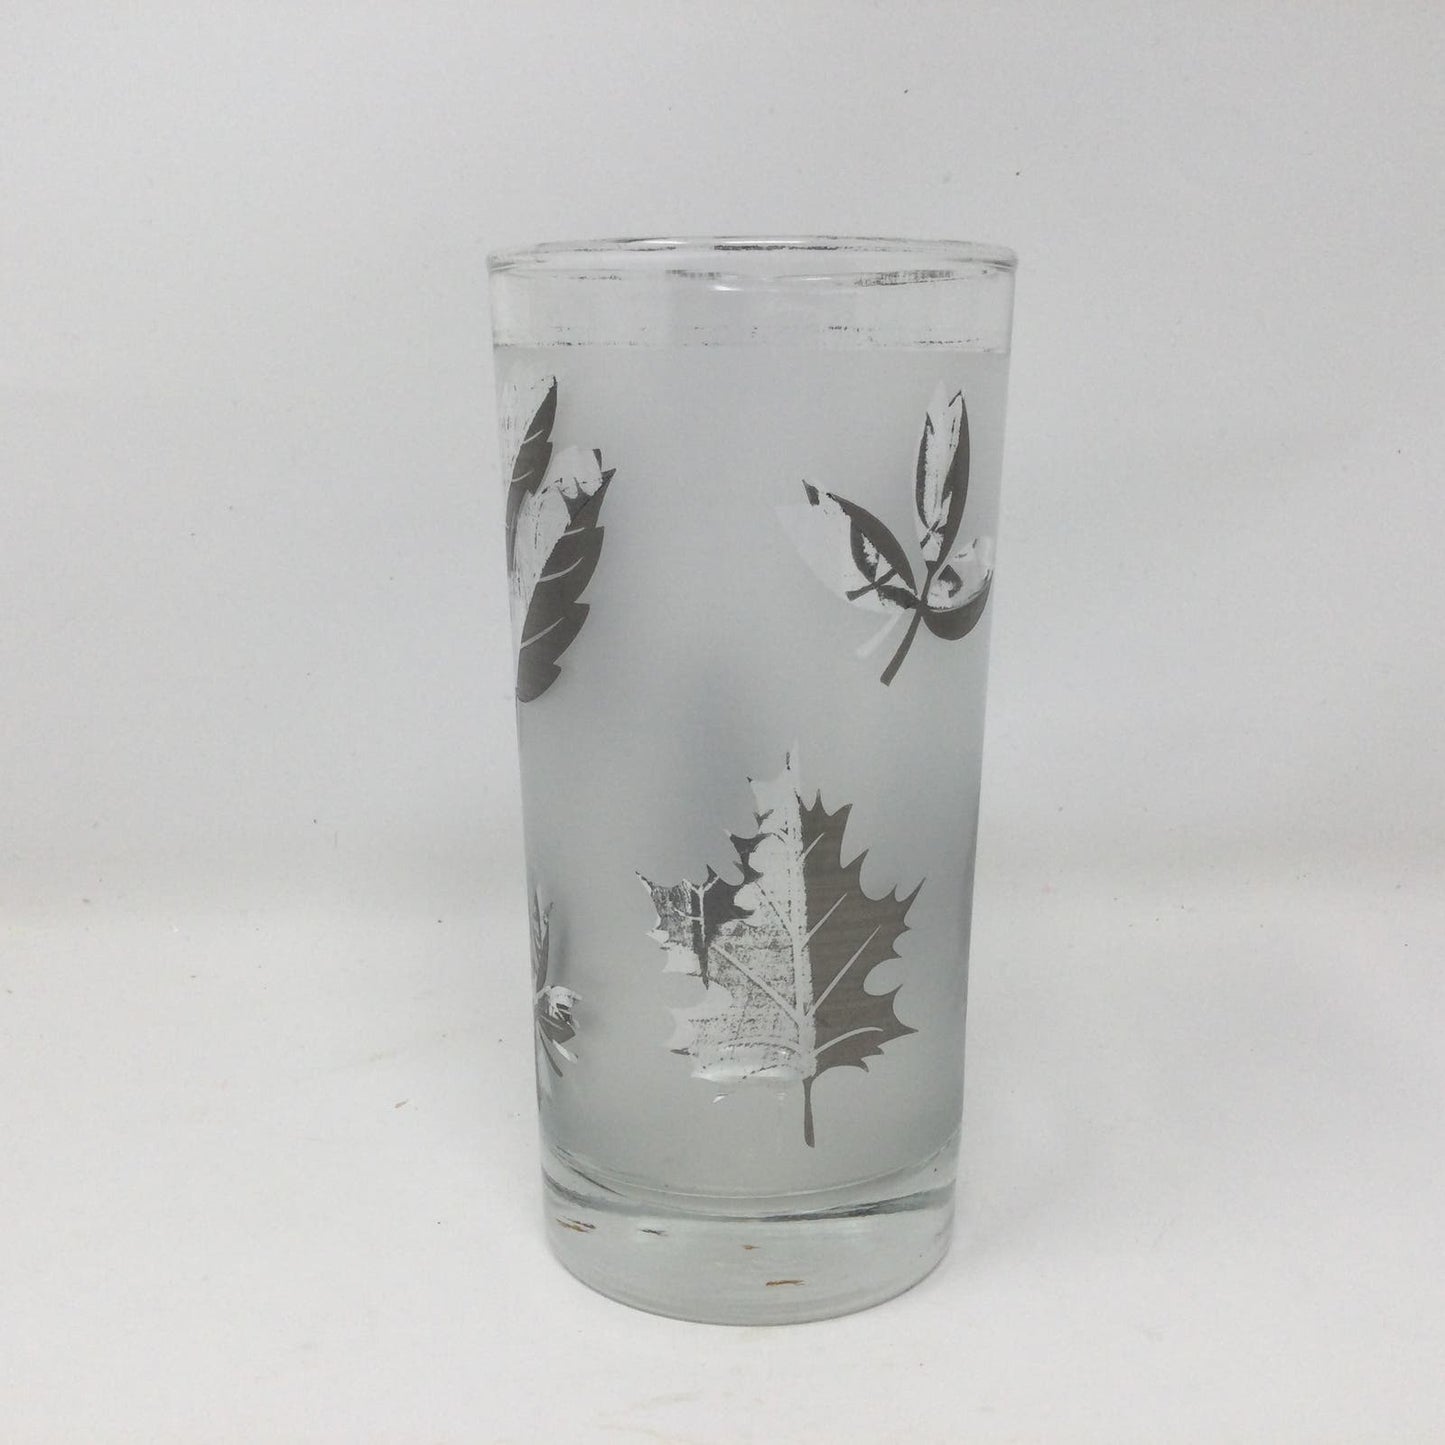 Libbey Starlyte Frosted Silver Leaf Glasses Foliage Set of 8 With Carrier